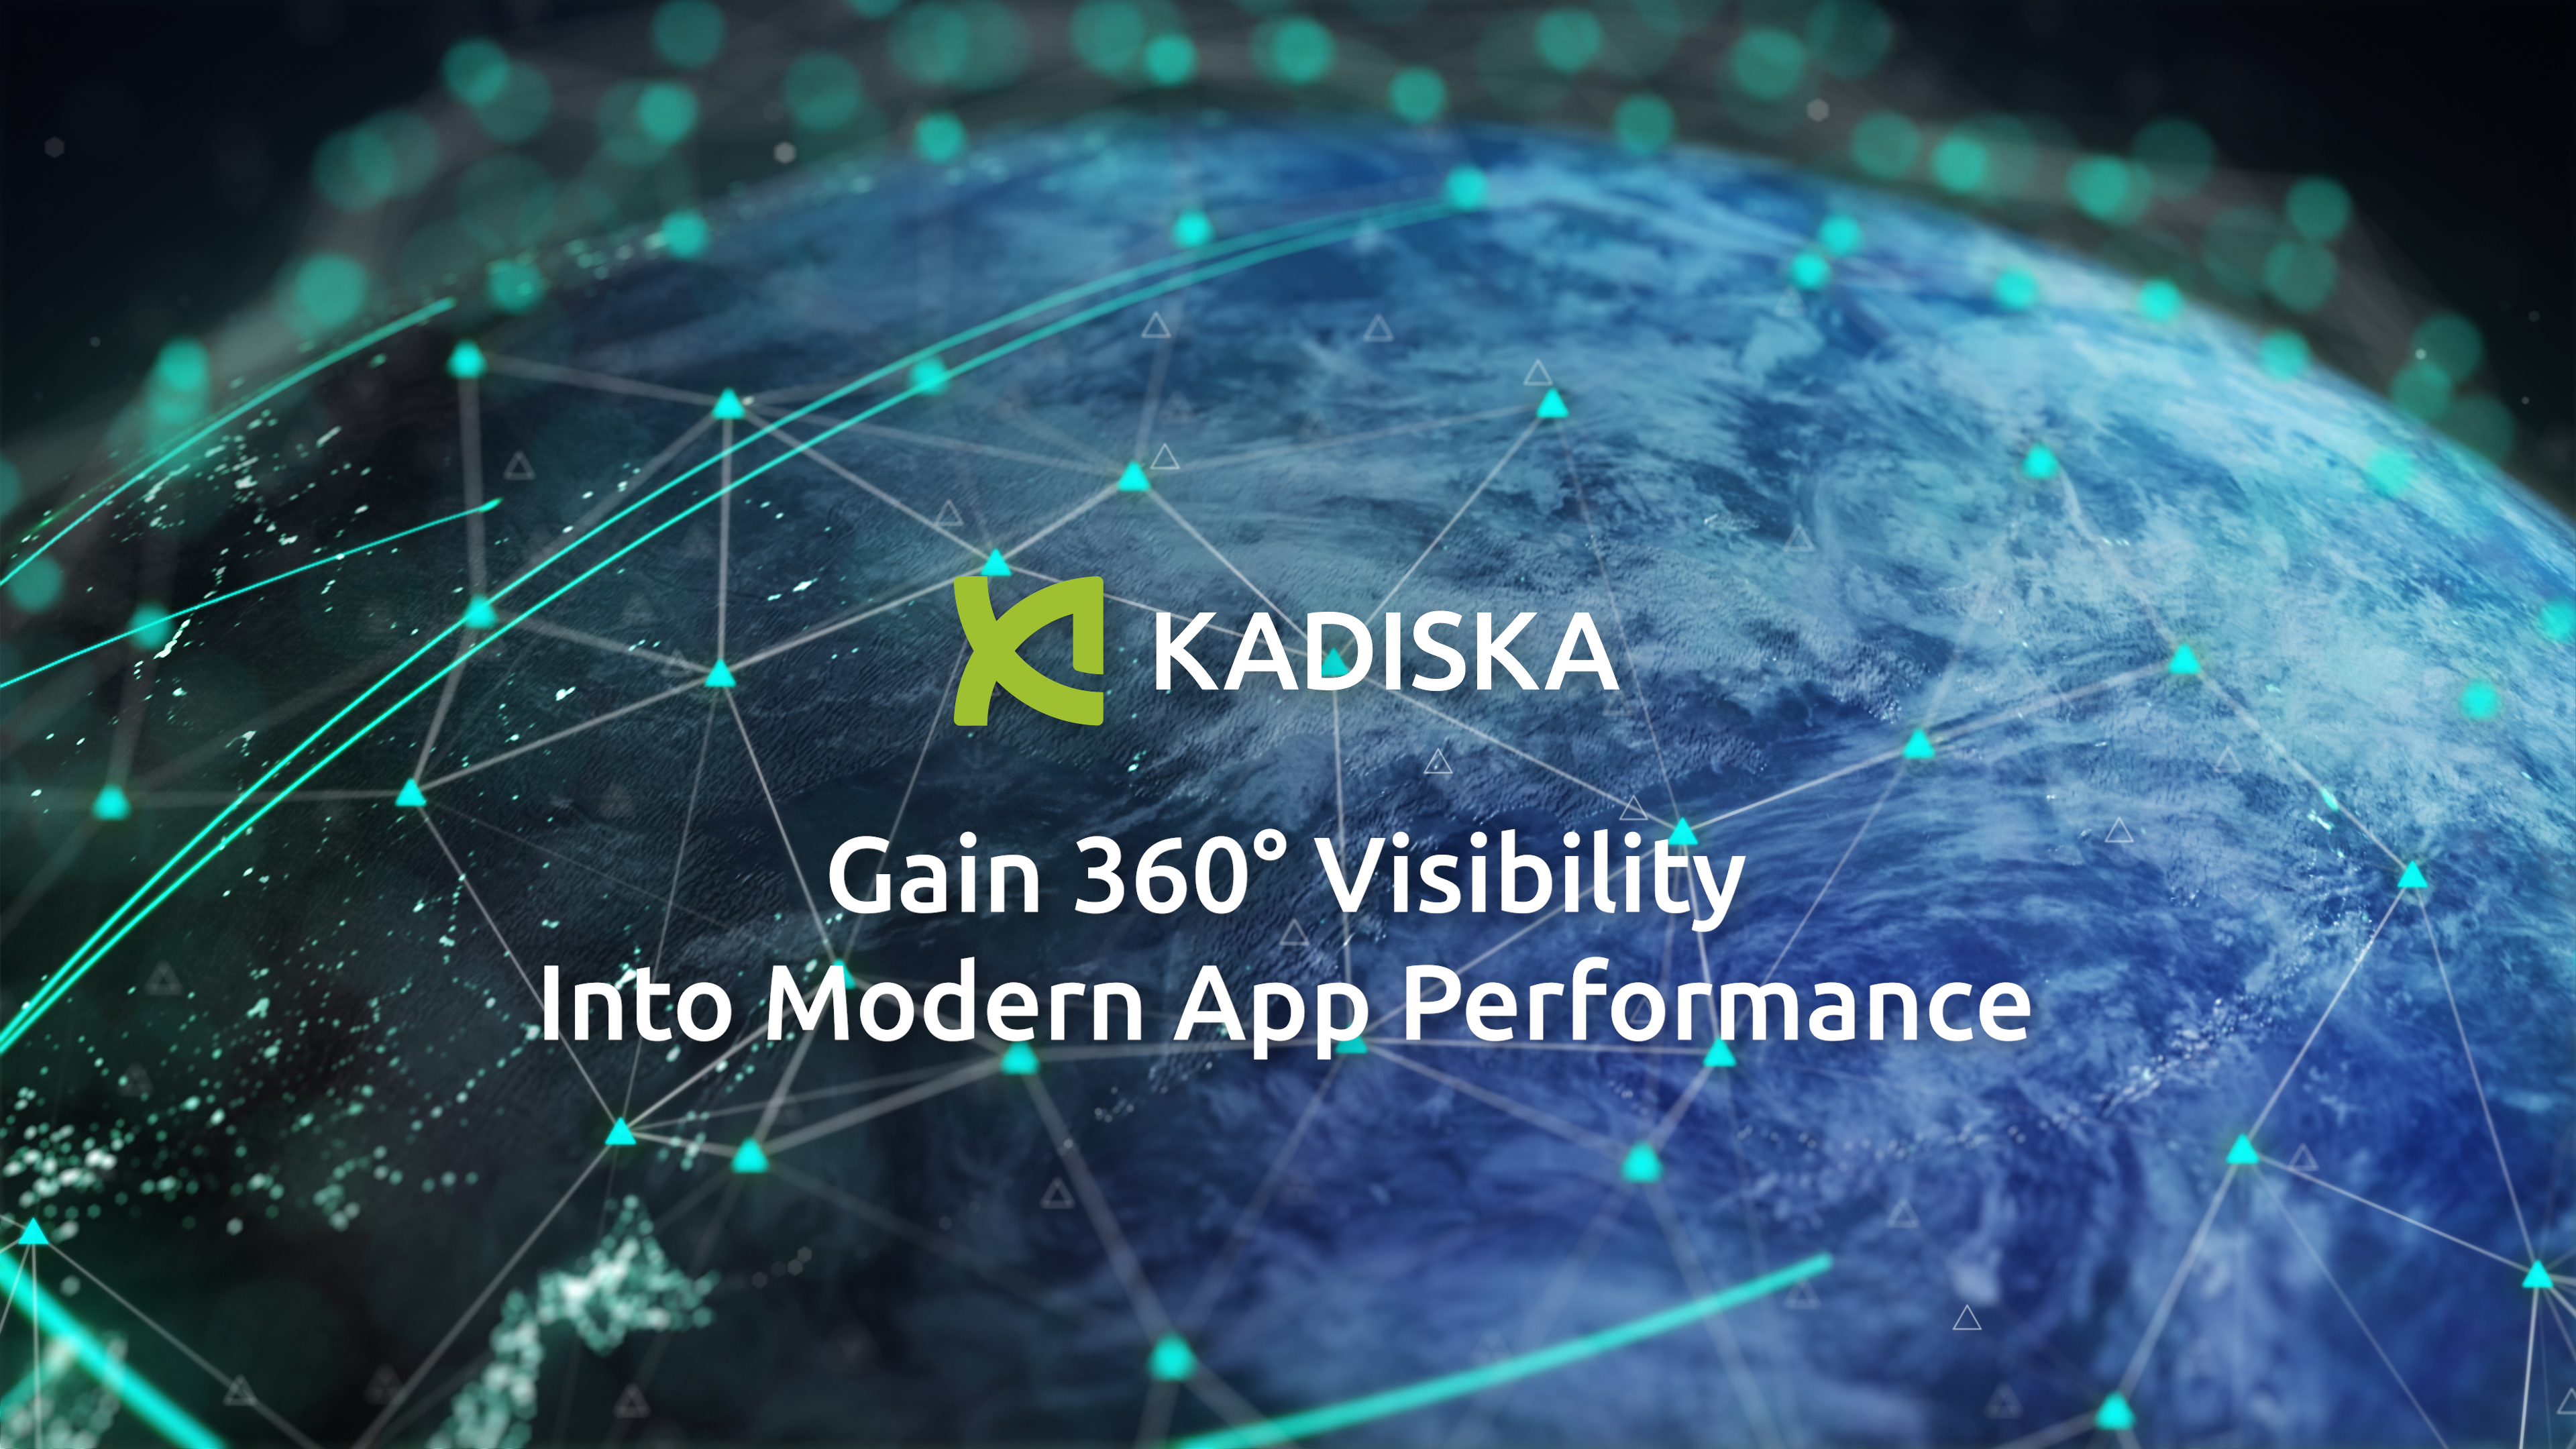 Gain 360° Visibility Into Modern App Performance to Deliver an Amazing User Experience